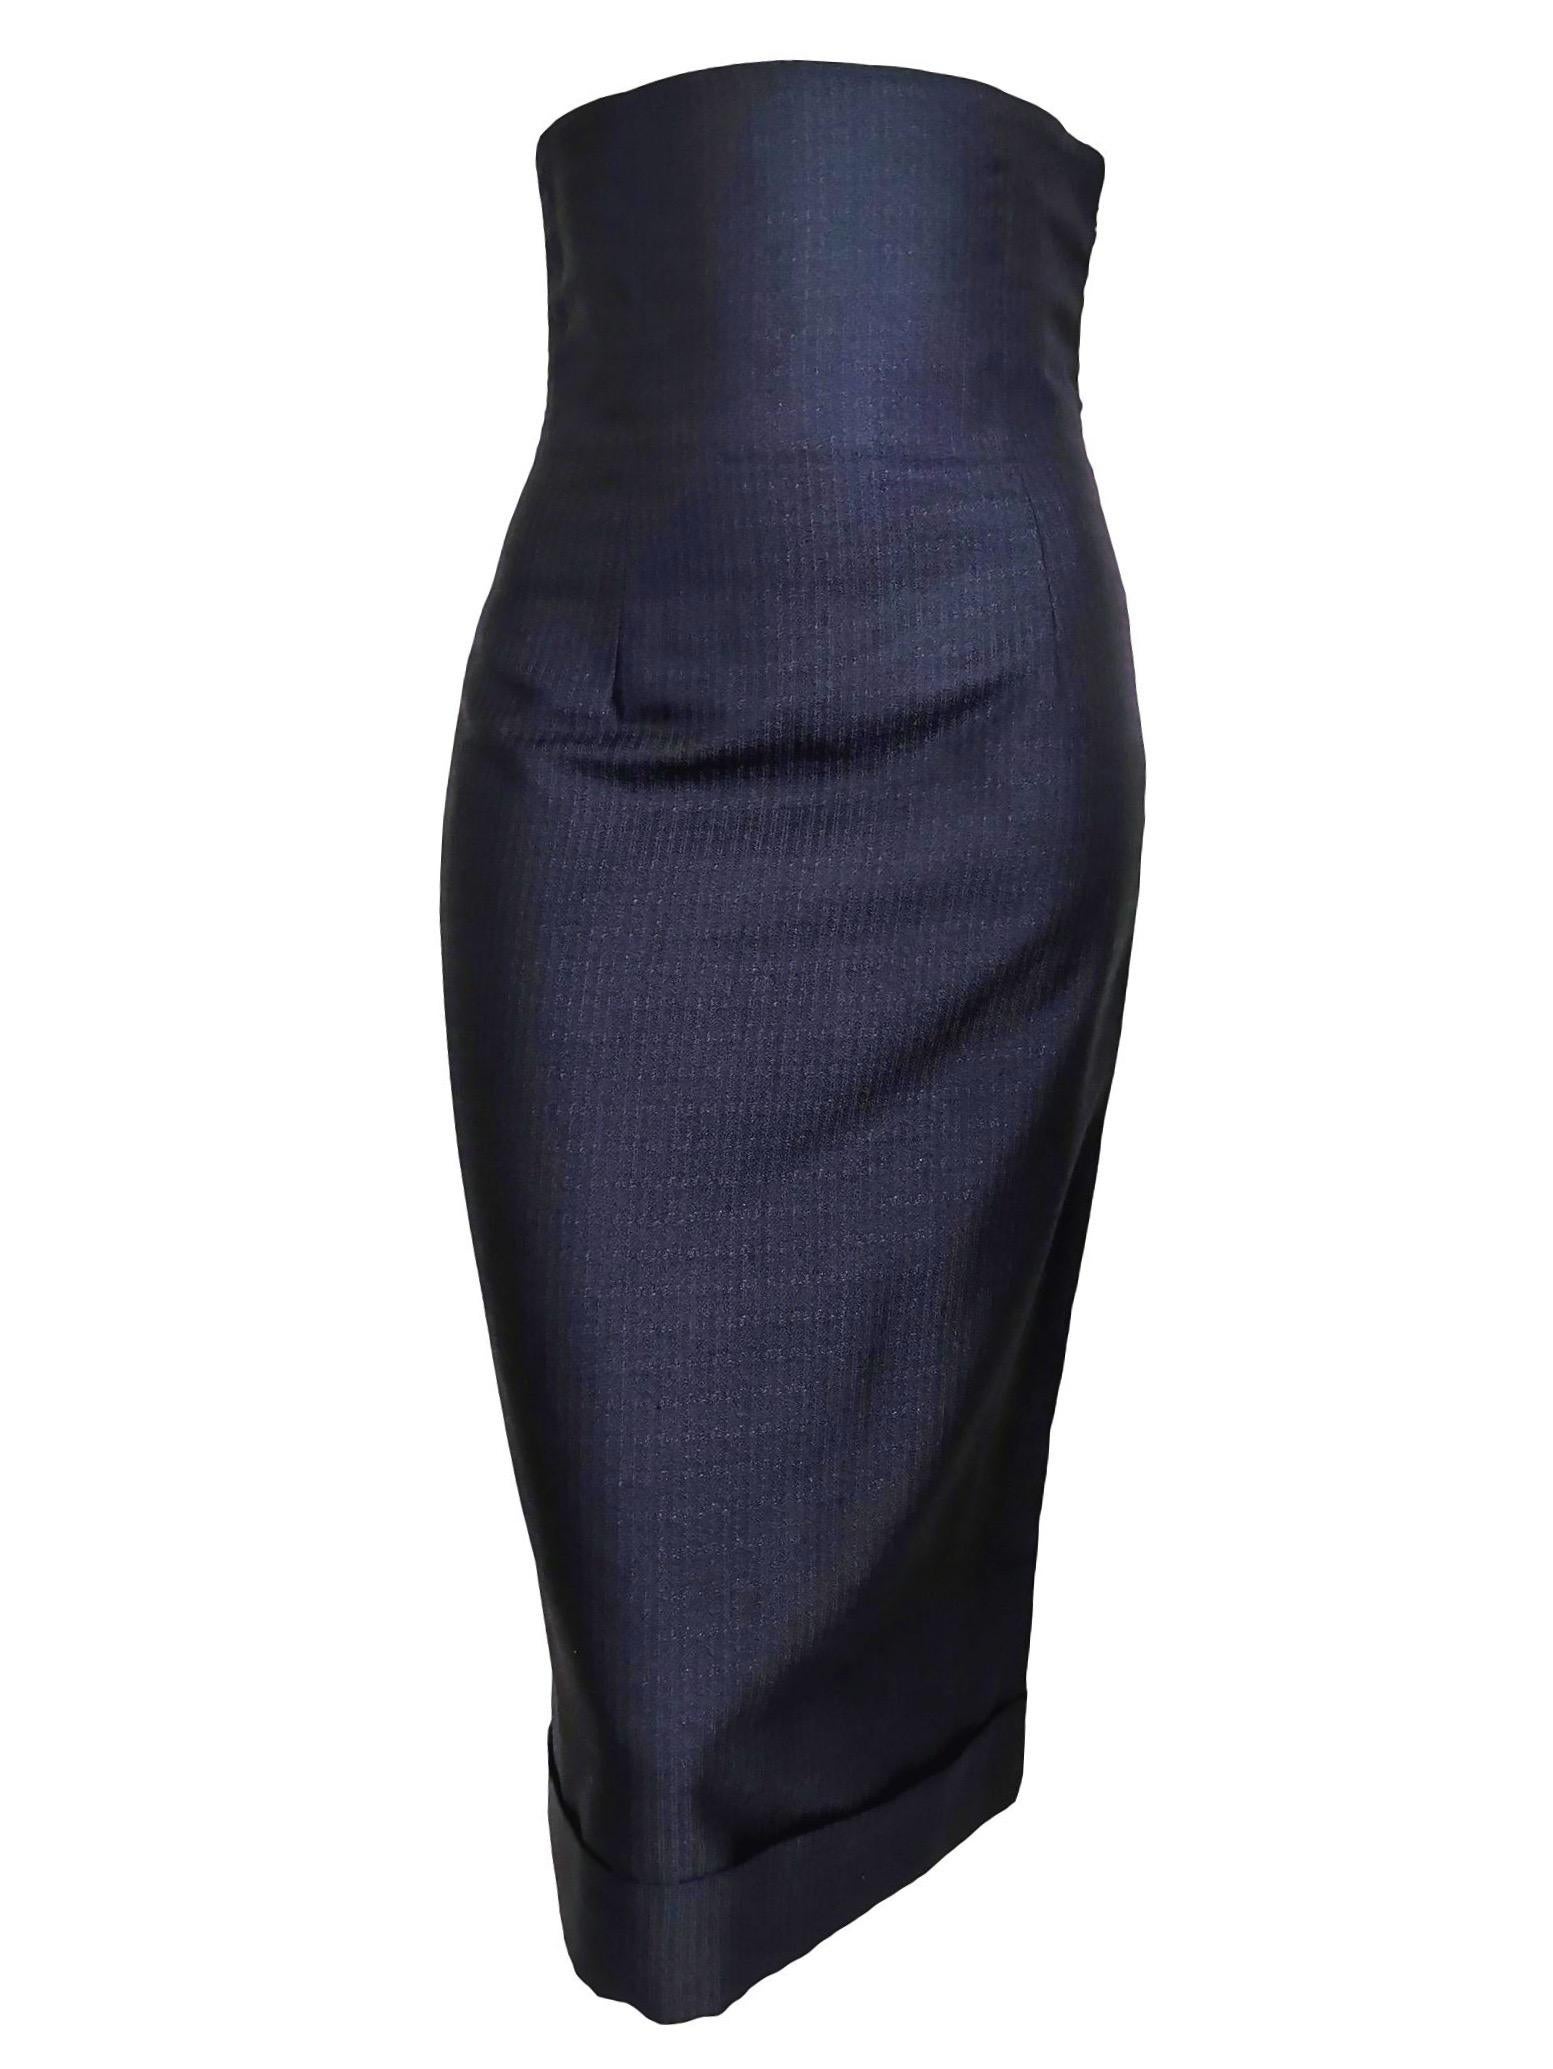 Alexander McQueen 1996 Fitted Dress In Good Condition For Sale In Bath, GB